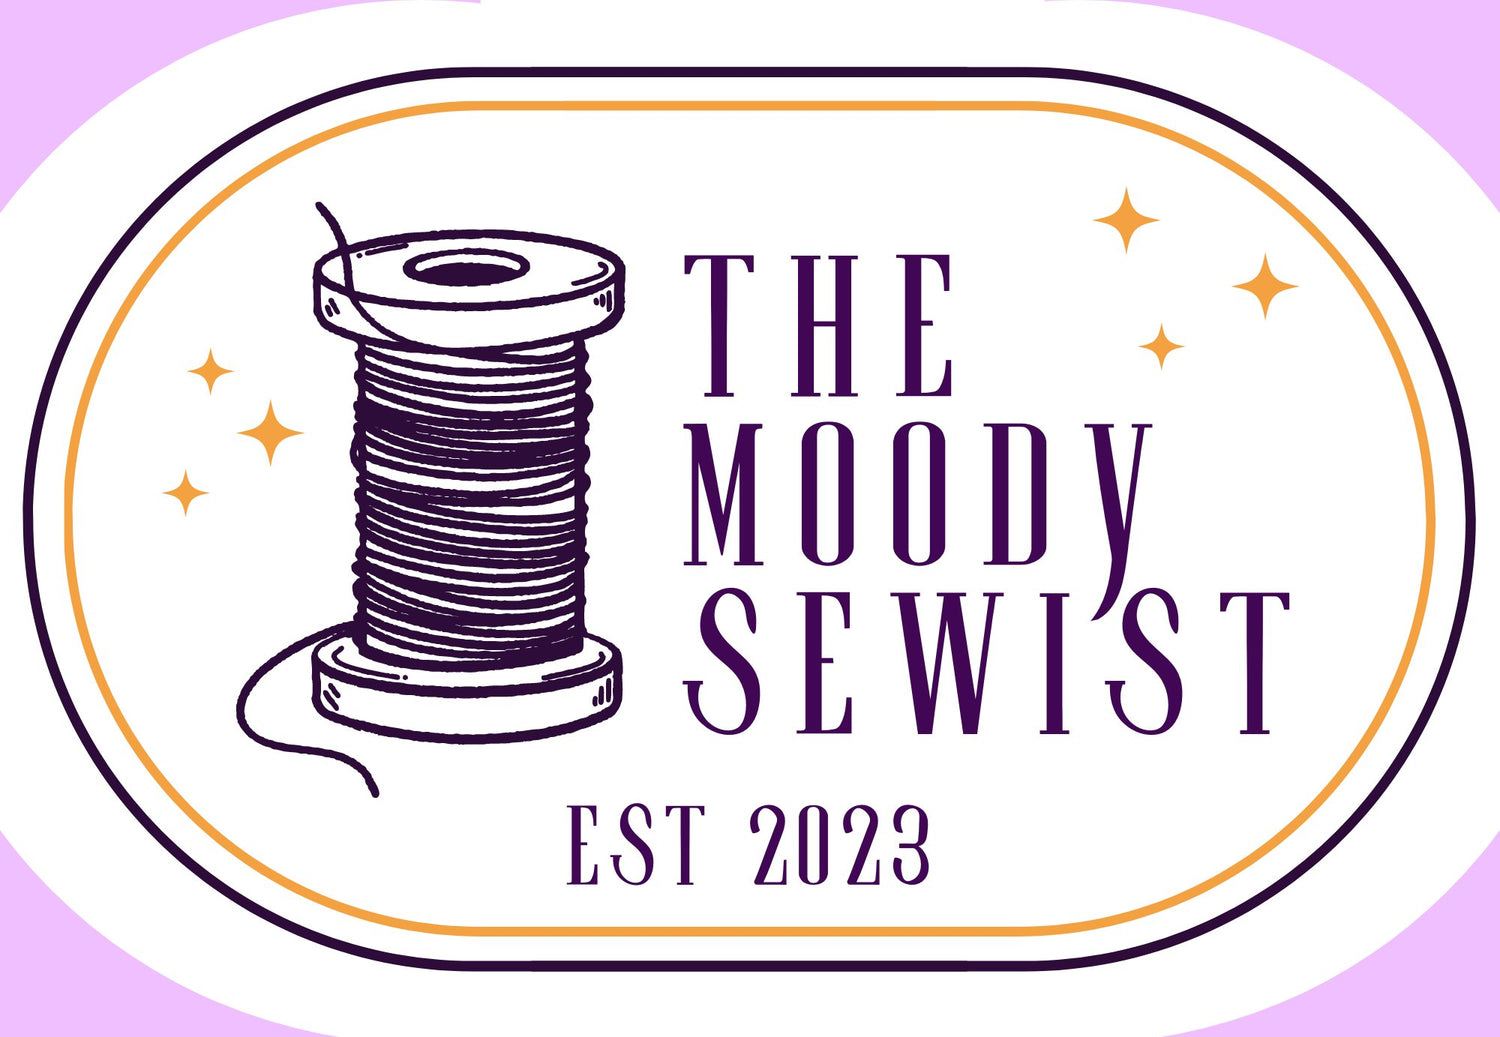 The Moody Sewist. Logo - A spool of thread with the text "The Moody Sewist, EST 2023"